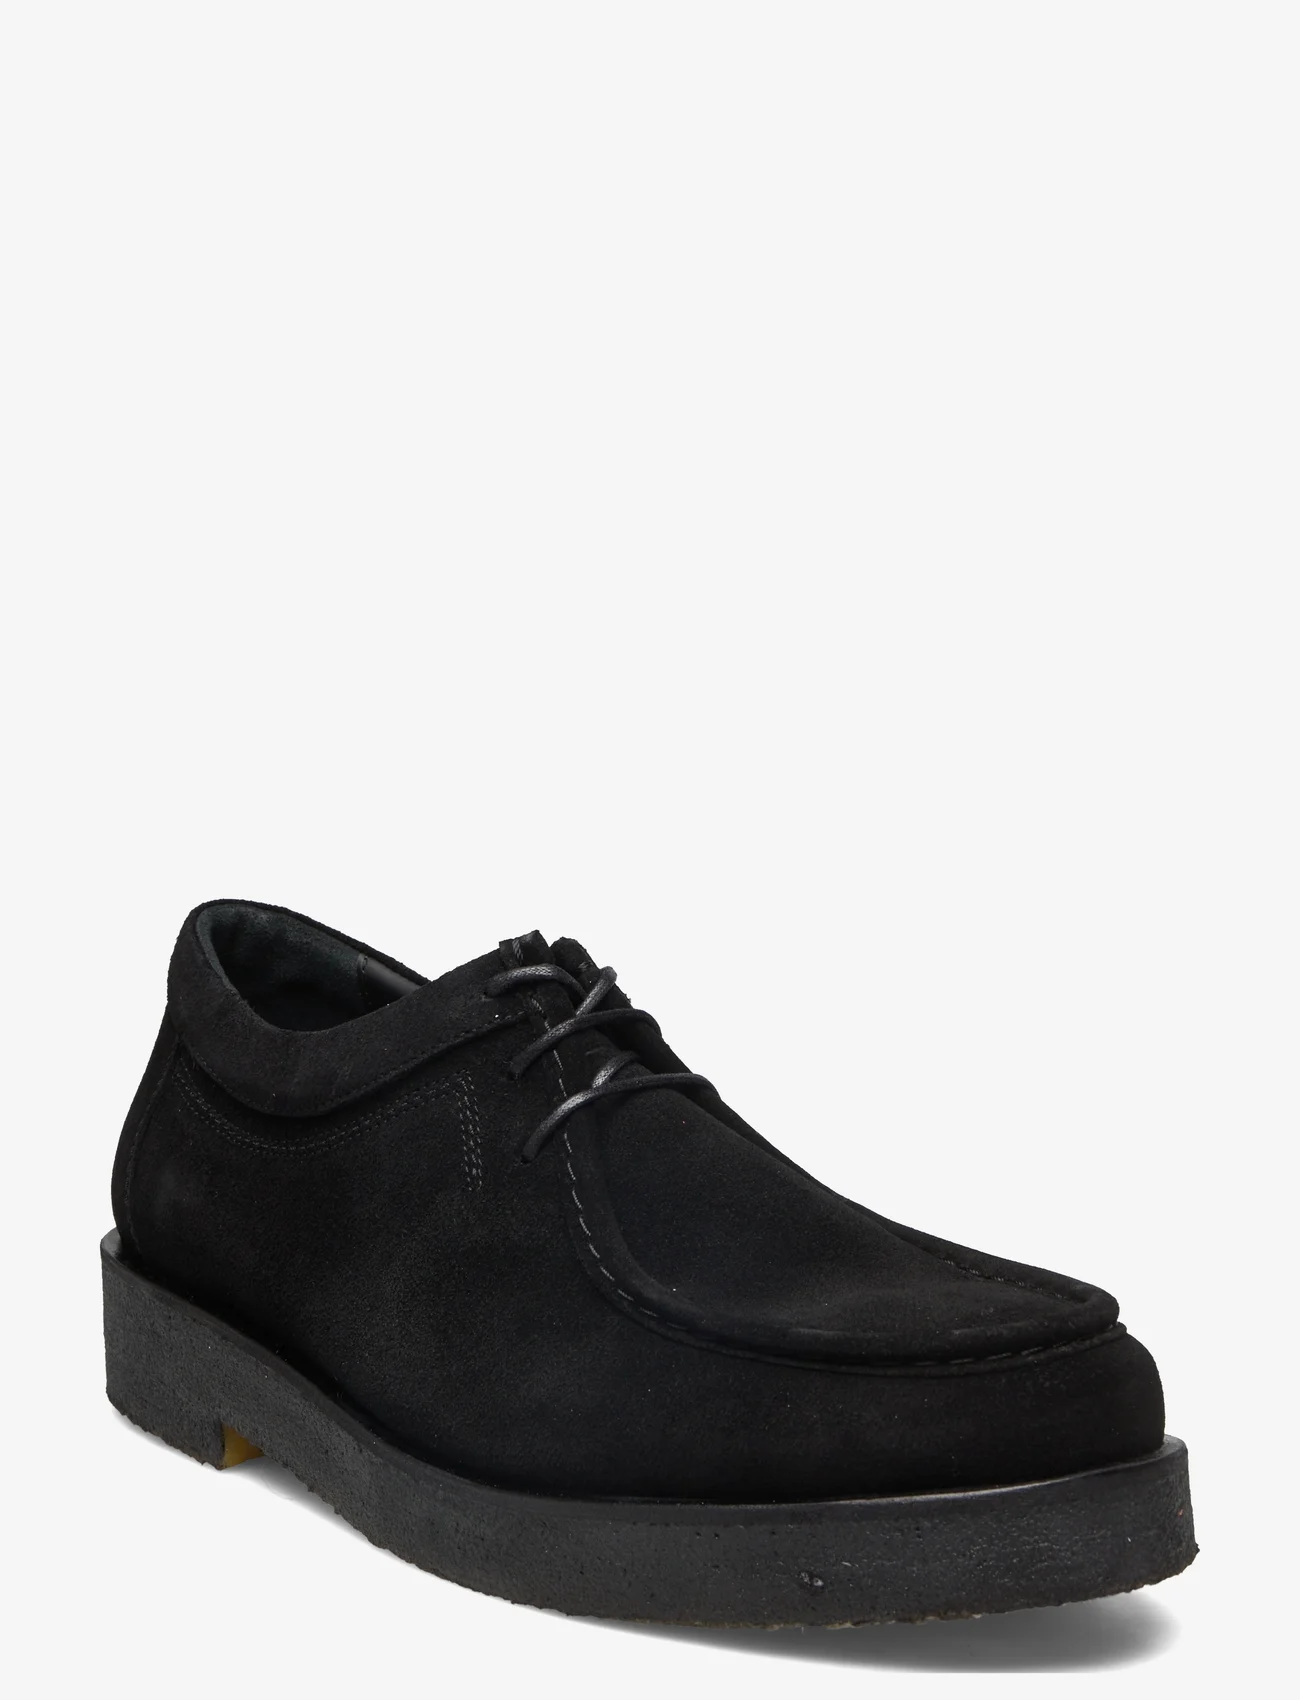 ANGULUS - Shoes - flat - with lace - desert boots - 1163 black - 0